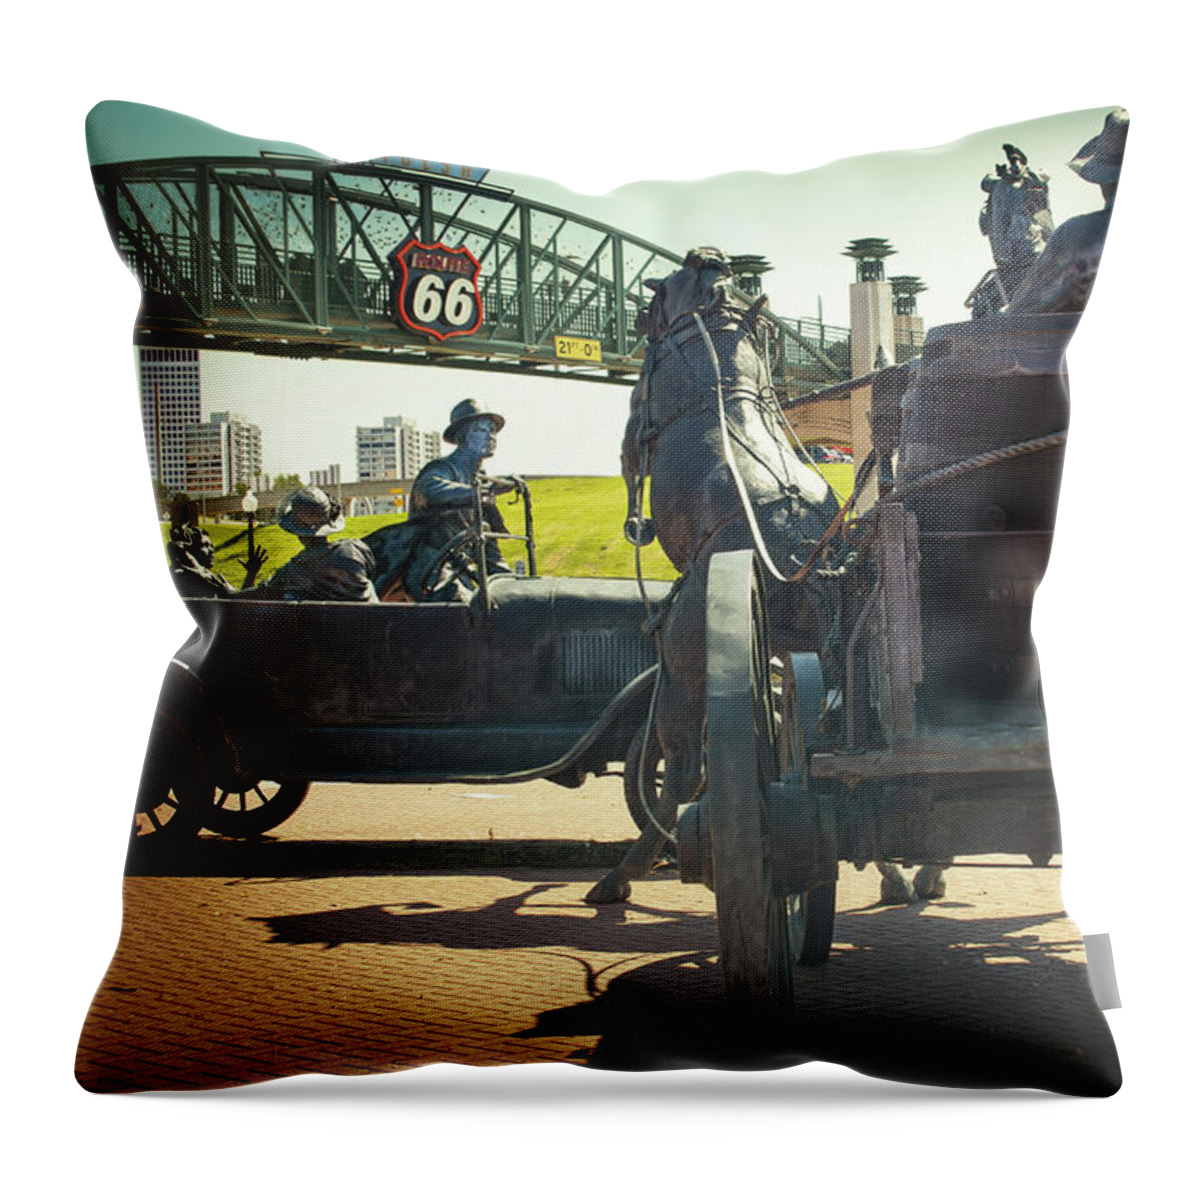 Route 66 Throw Pillow featuring the photograph Culture Crash on Route 66 by Susan Vineyard